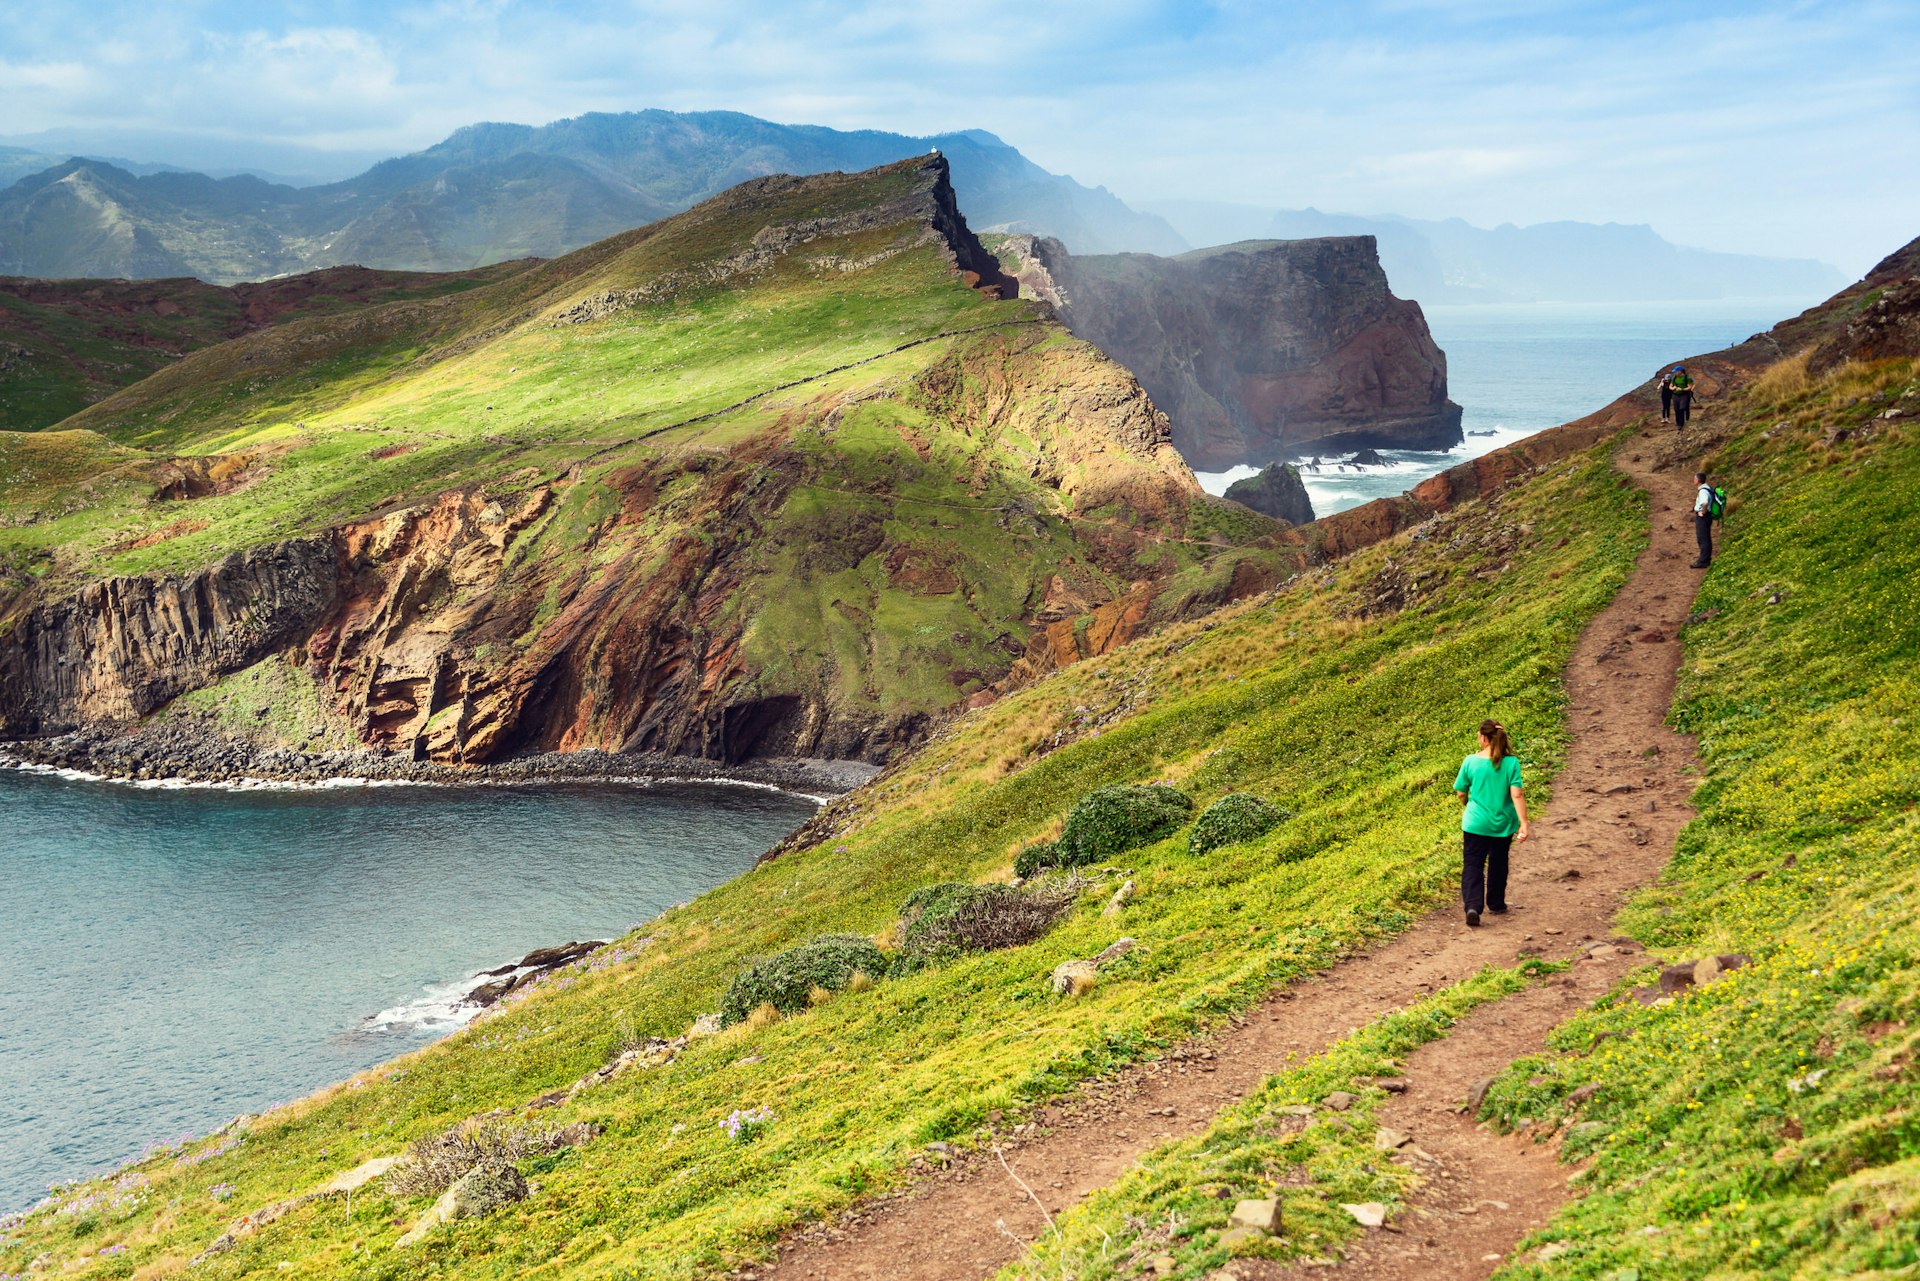 Three hikers walk along a grassy coastal trail. One is looking down towards the sea, and there are rugged mountains in the distance.